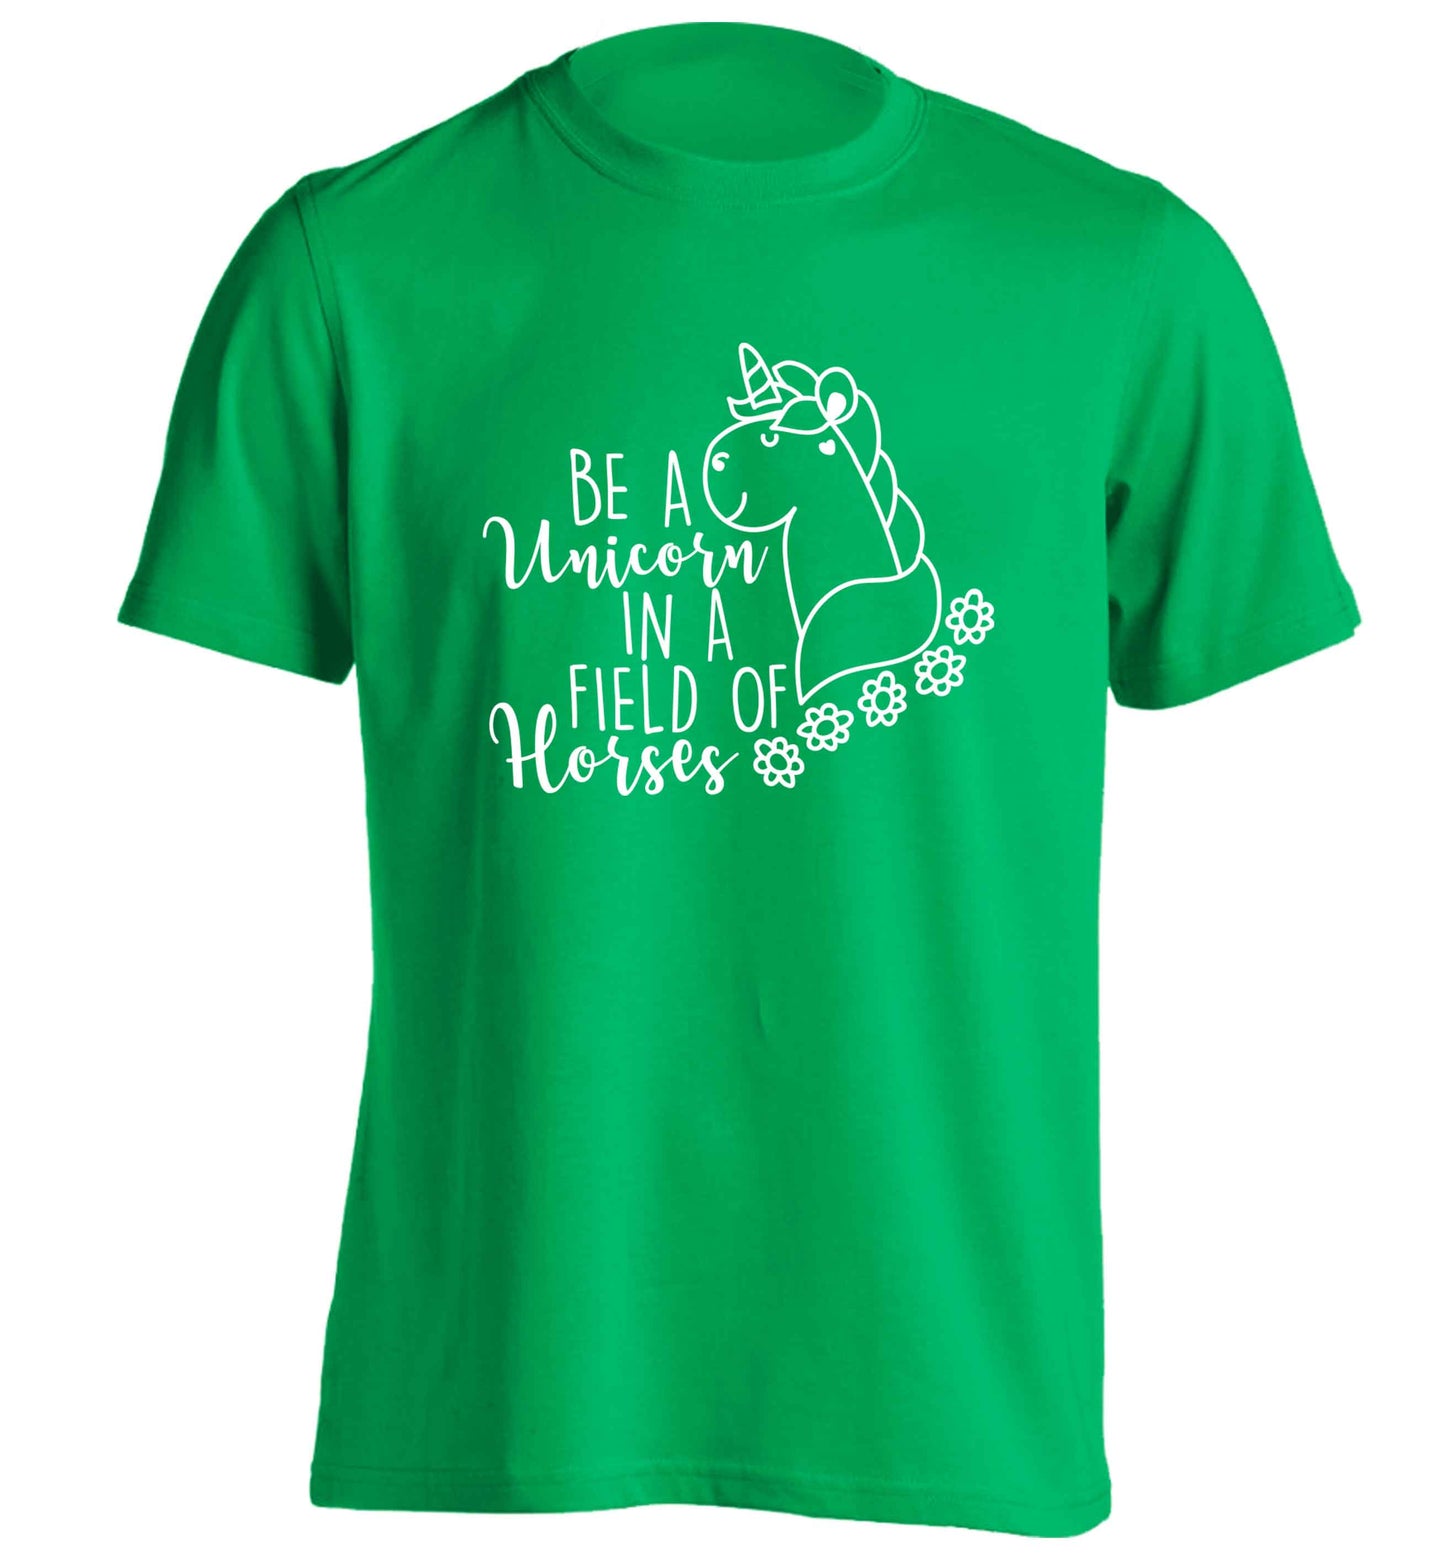 Be a unicorn in a field of horses adults unisex green Tshirt 2XL